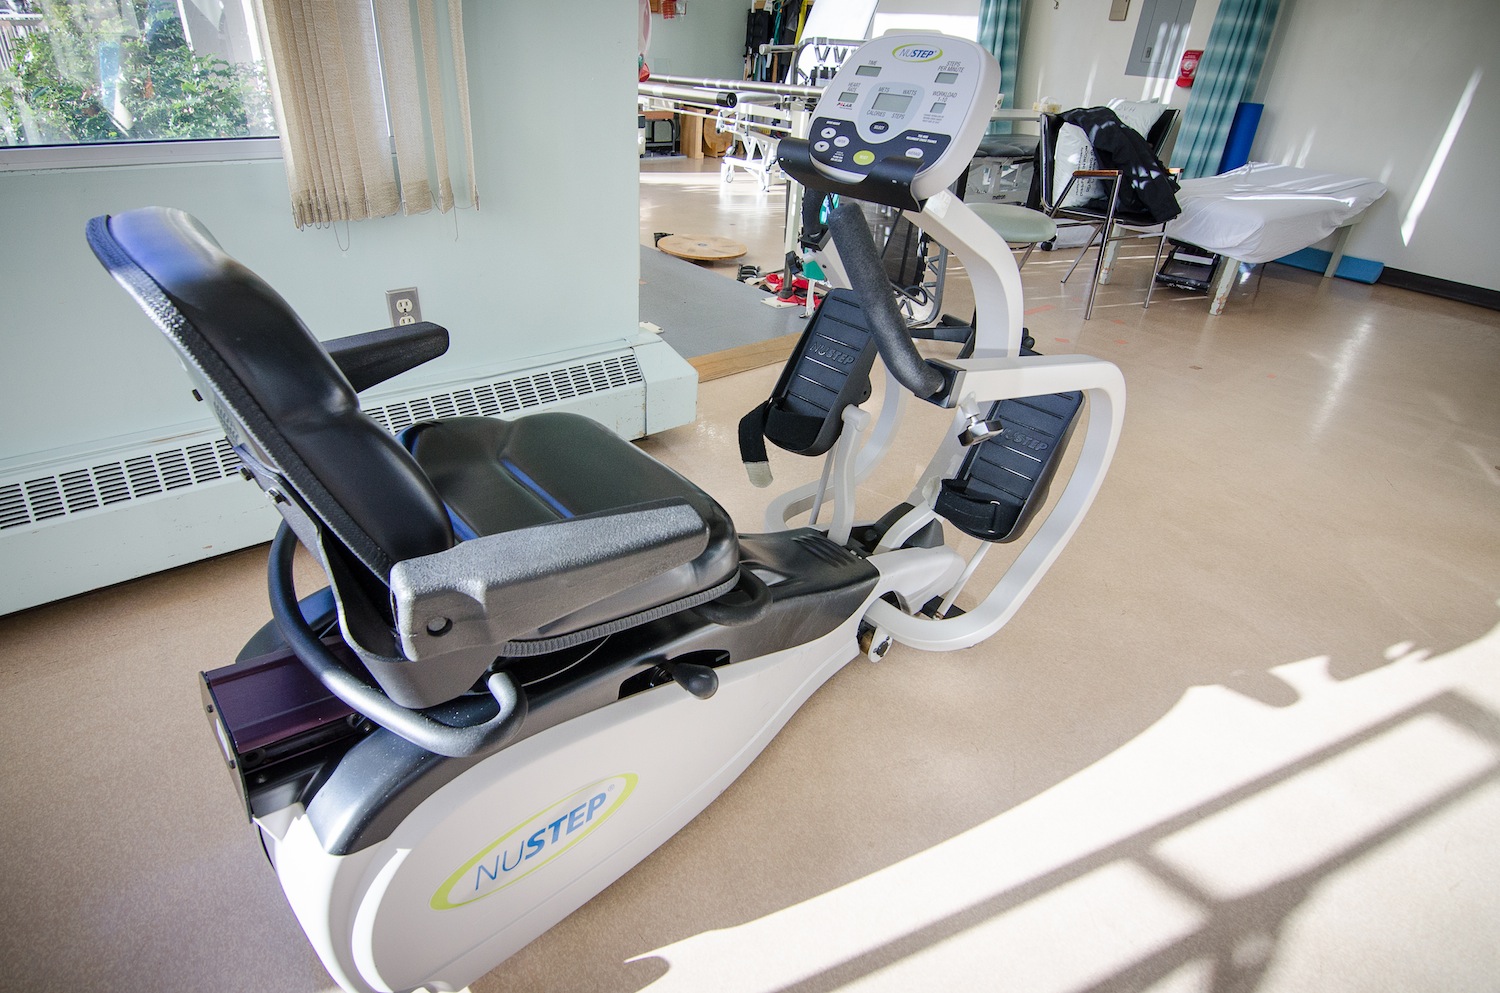 Recumbent Cross Trainer donated by the Revelstoke Health Foundation